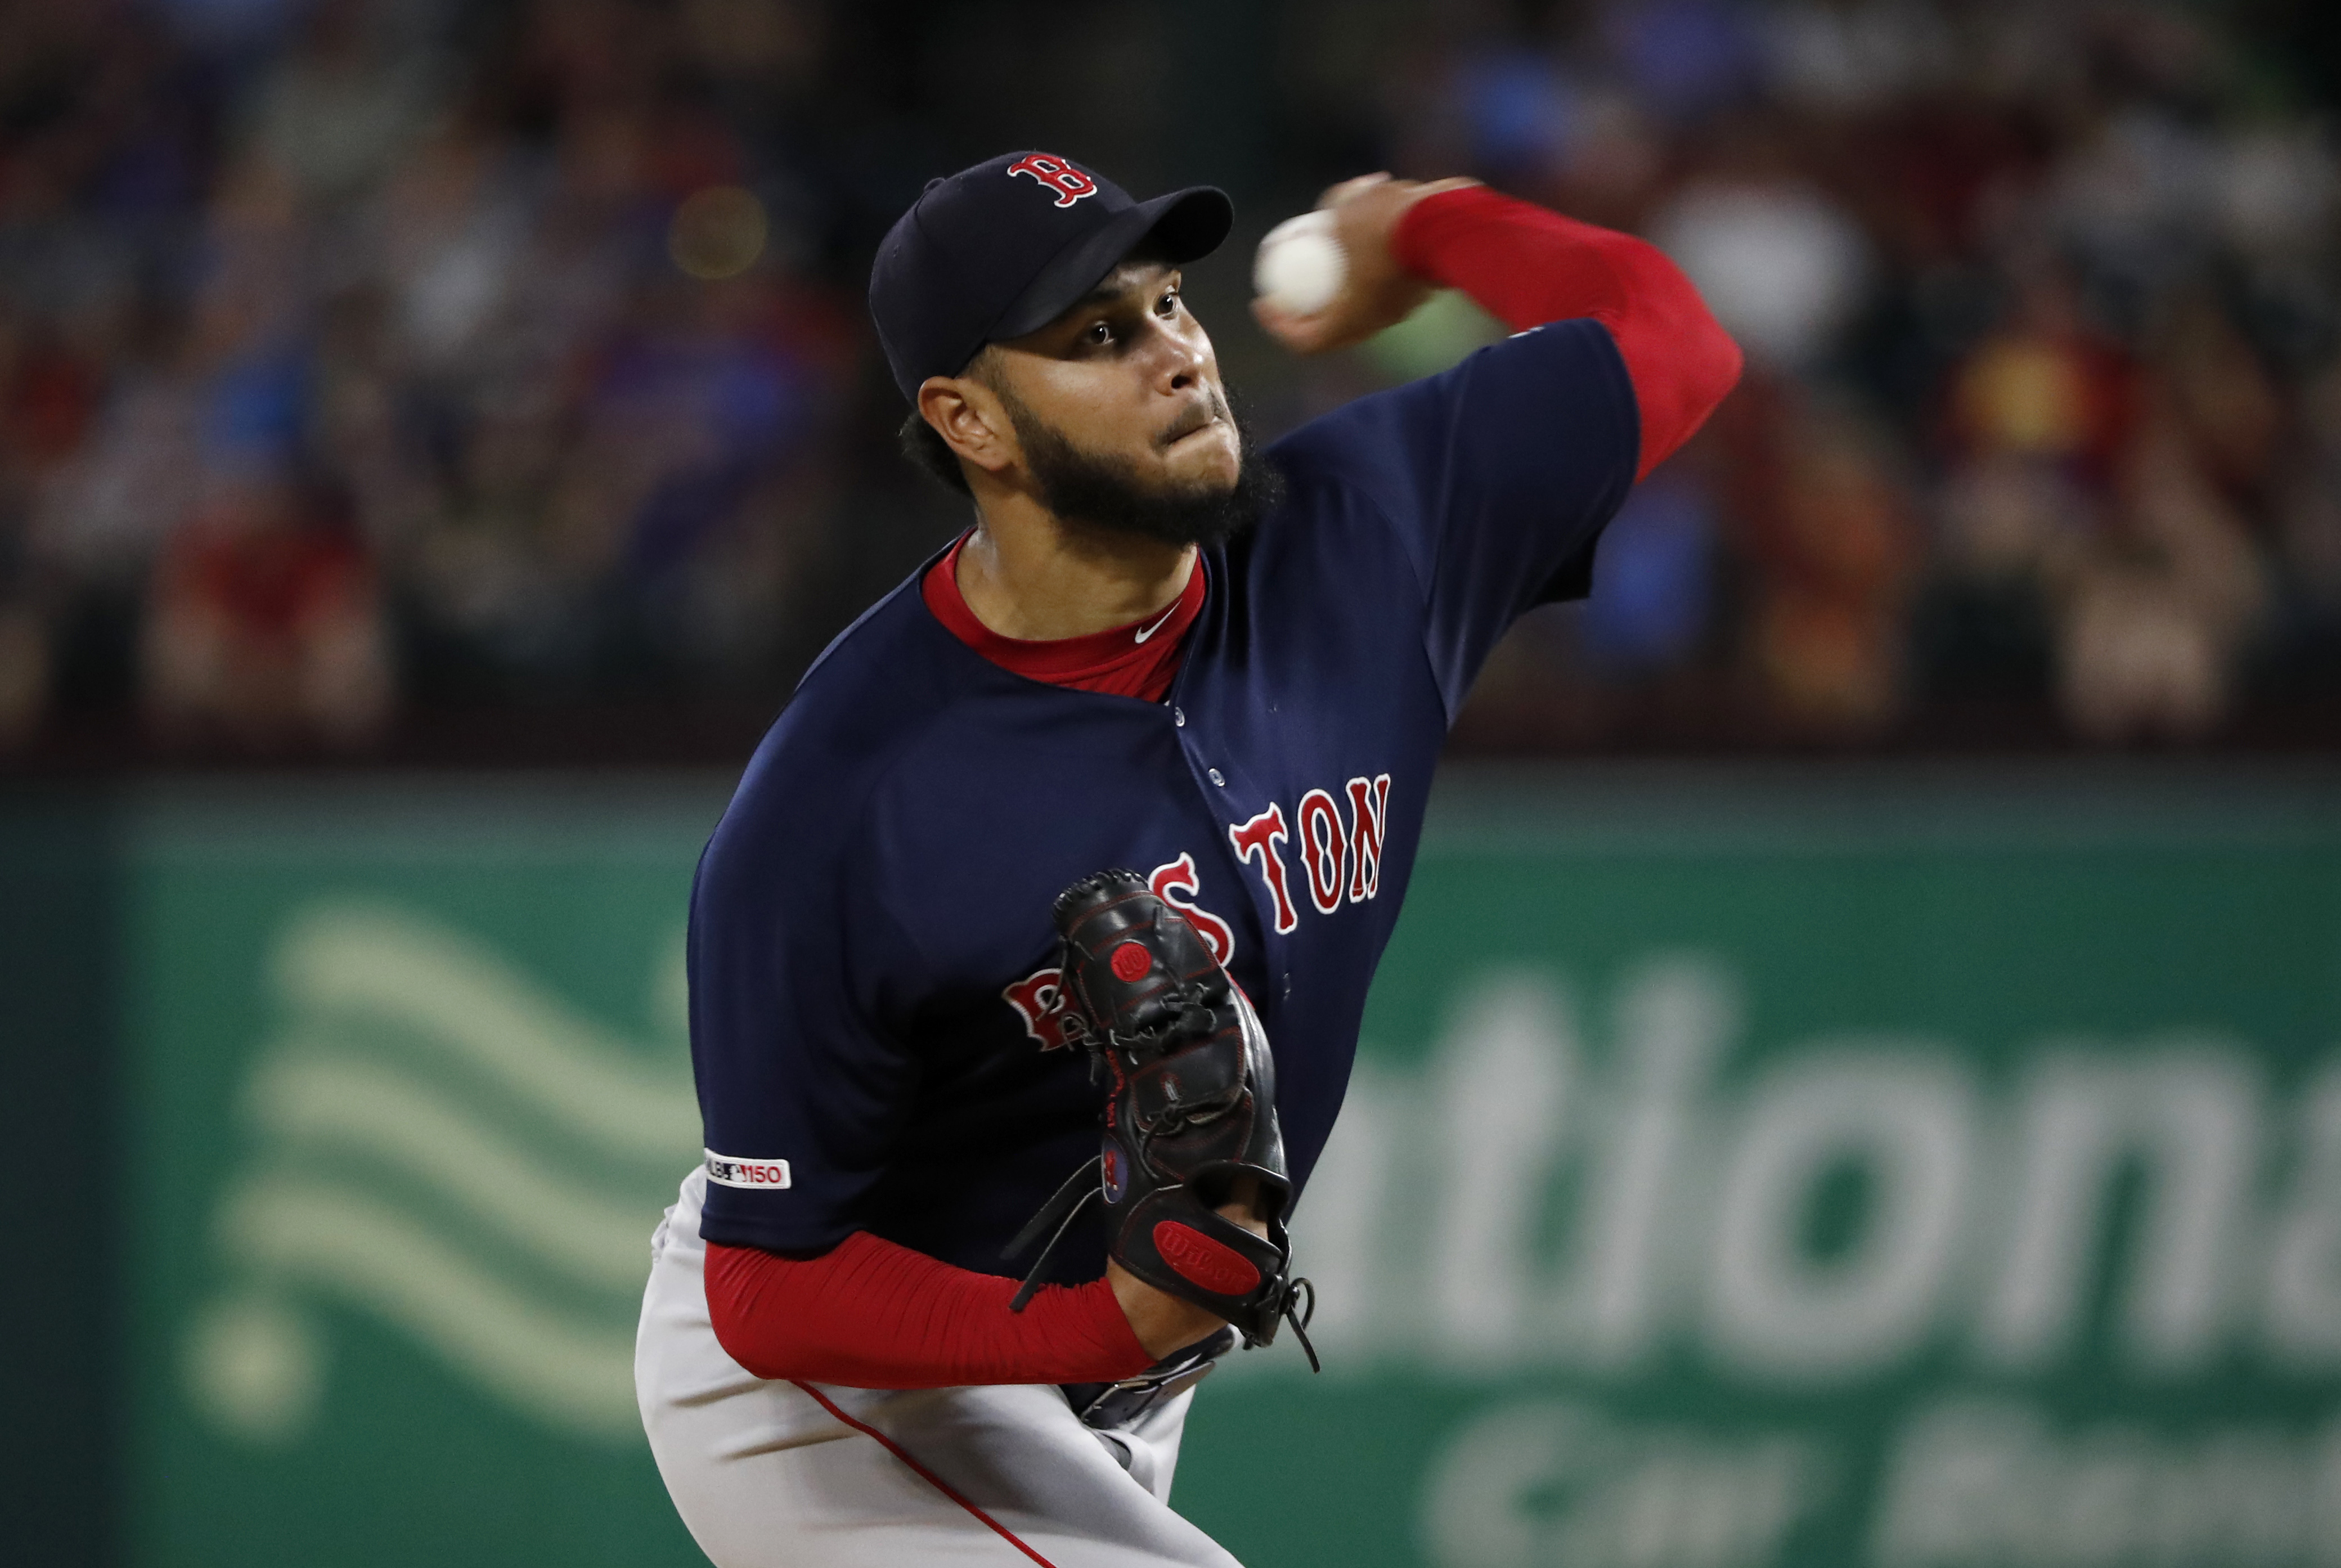 Rodriguez labors for 19th win as Red Sox beat Rangers 12-10